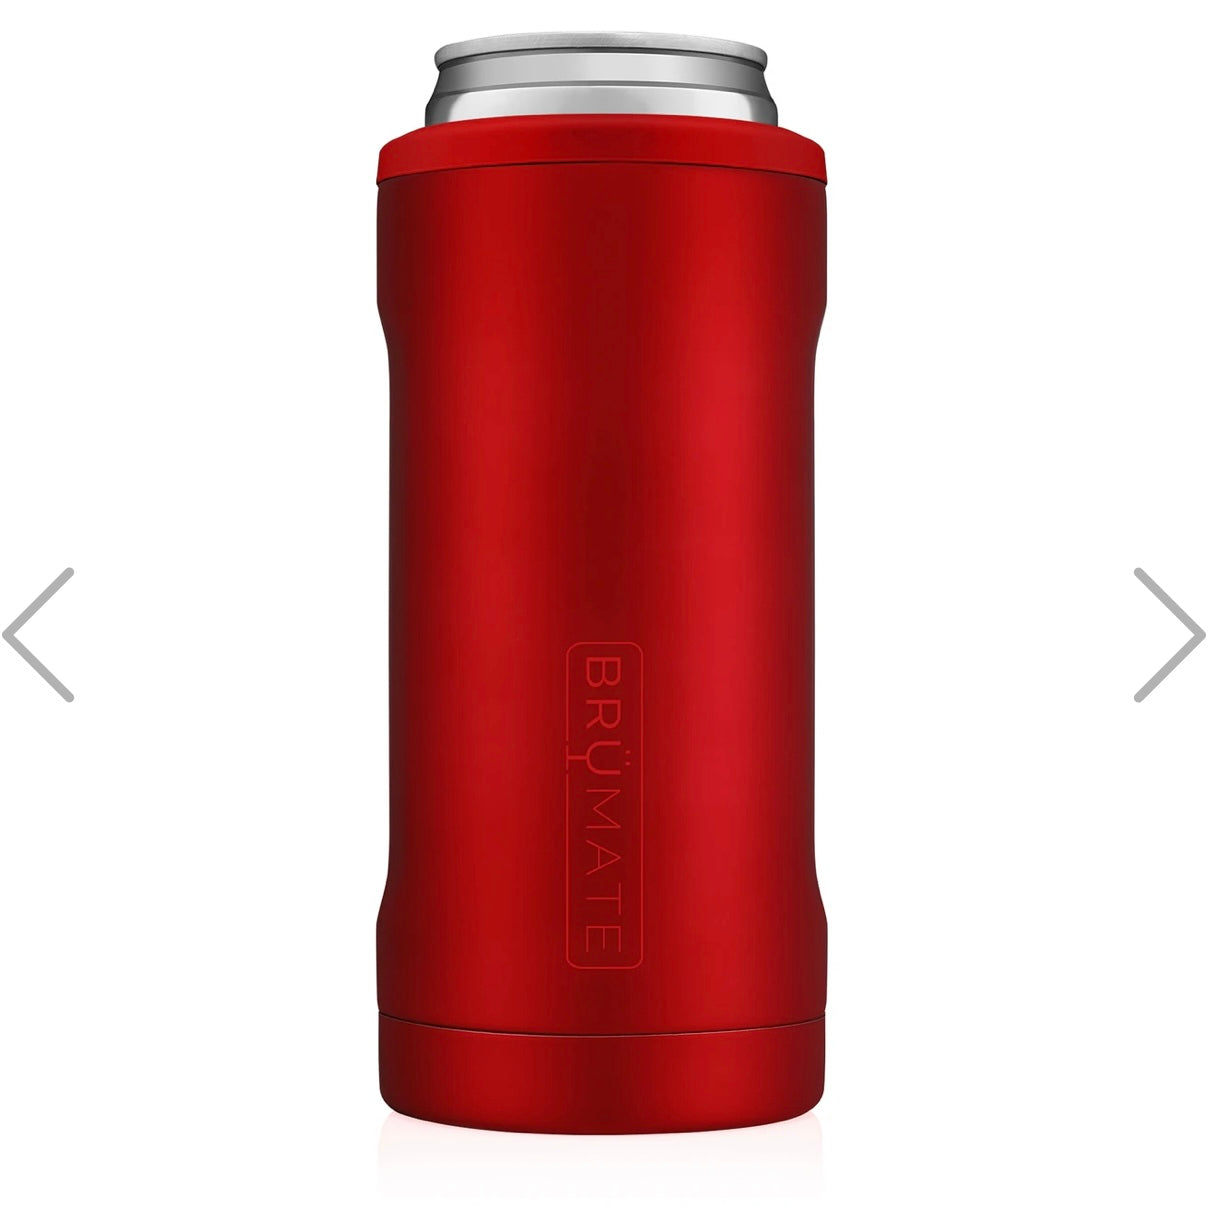 slim cans leak-proof drinkware hot to cold insulated drinkware tumbler like yeti brumate spillproof metallic red